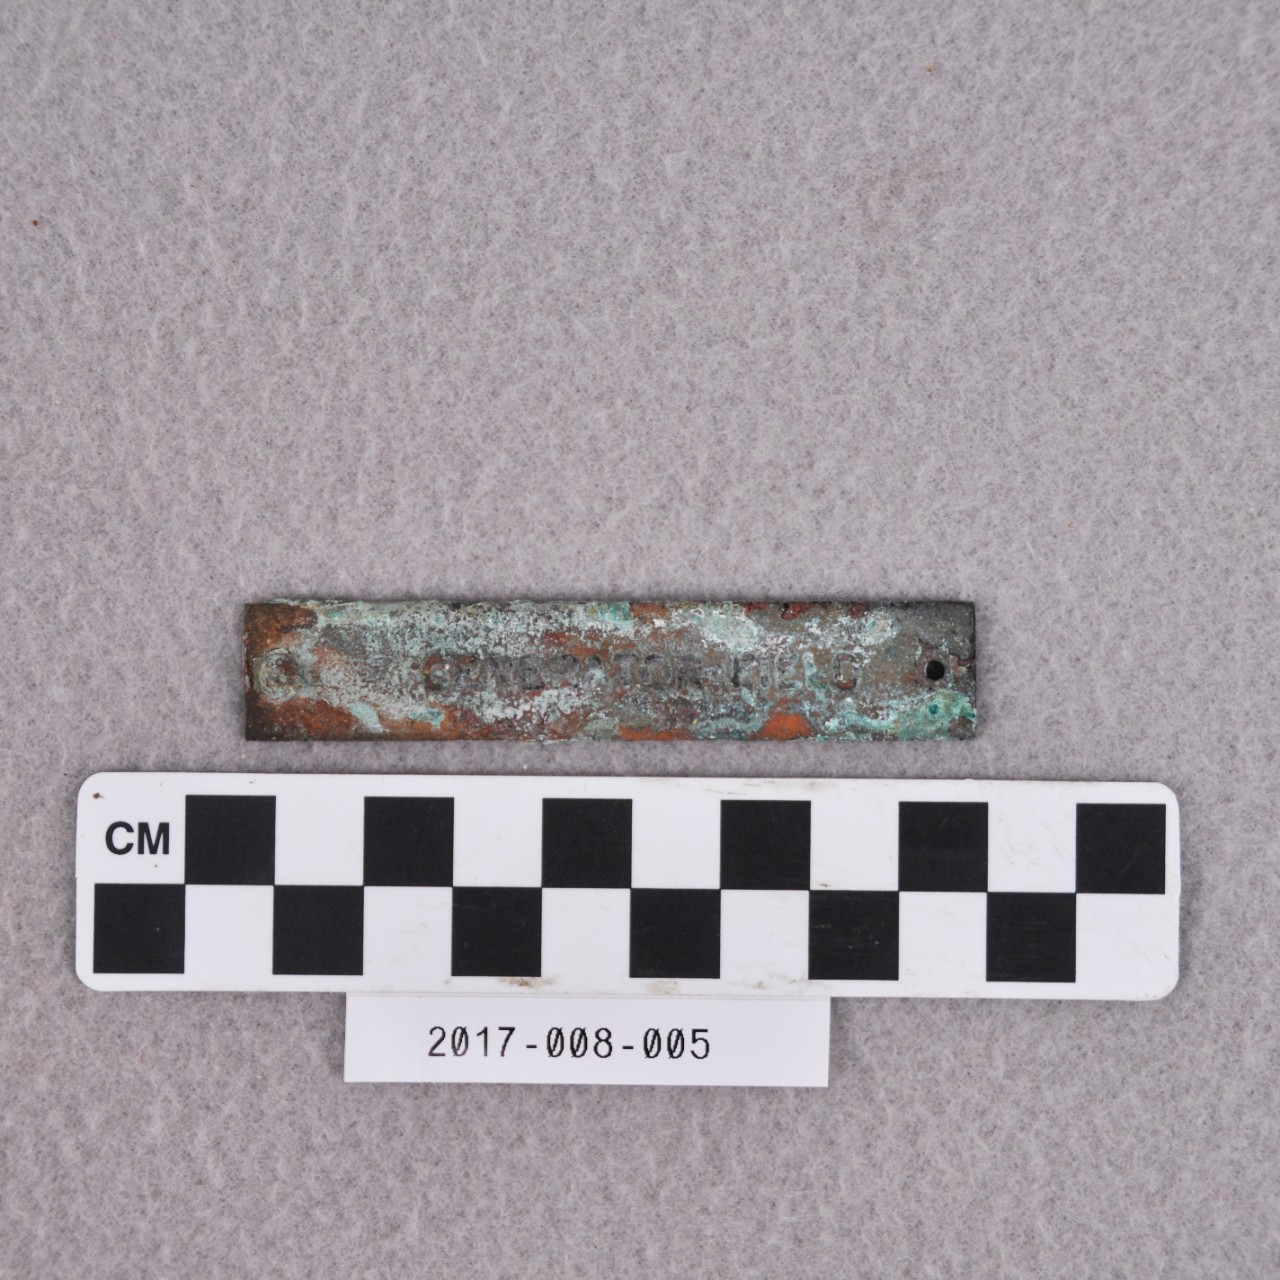 <p>A small, rectangular strip of brass covered with white and green corrosion. There is a hole on one end and a rivet on the other. There is text stamped on face that reads “GENERATOR FIELD”.</p>